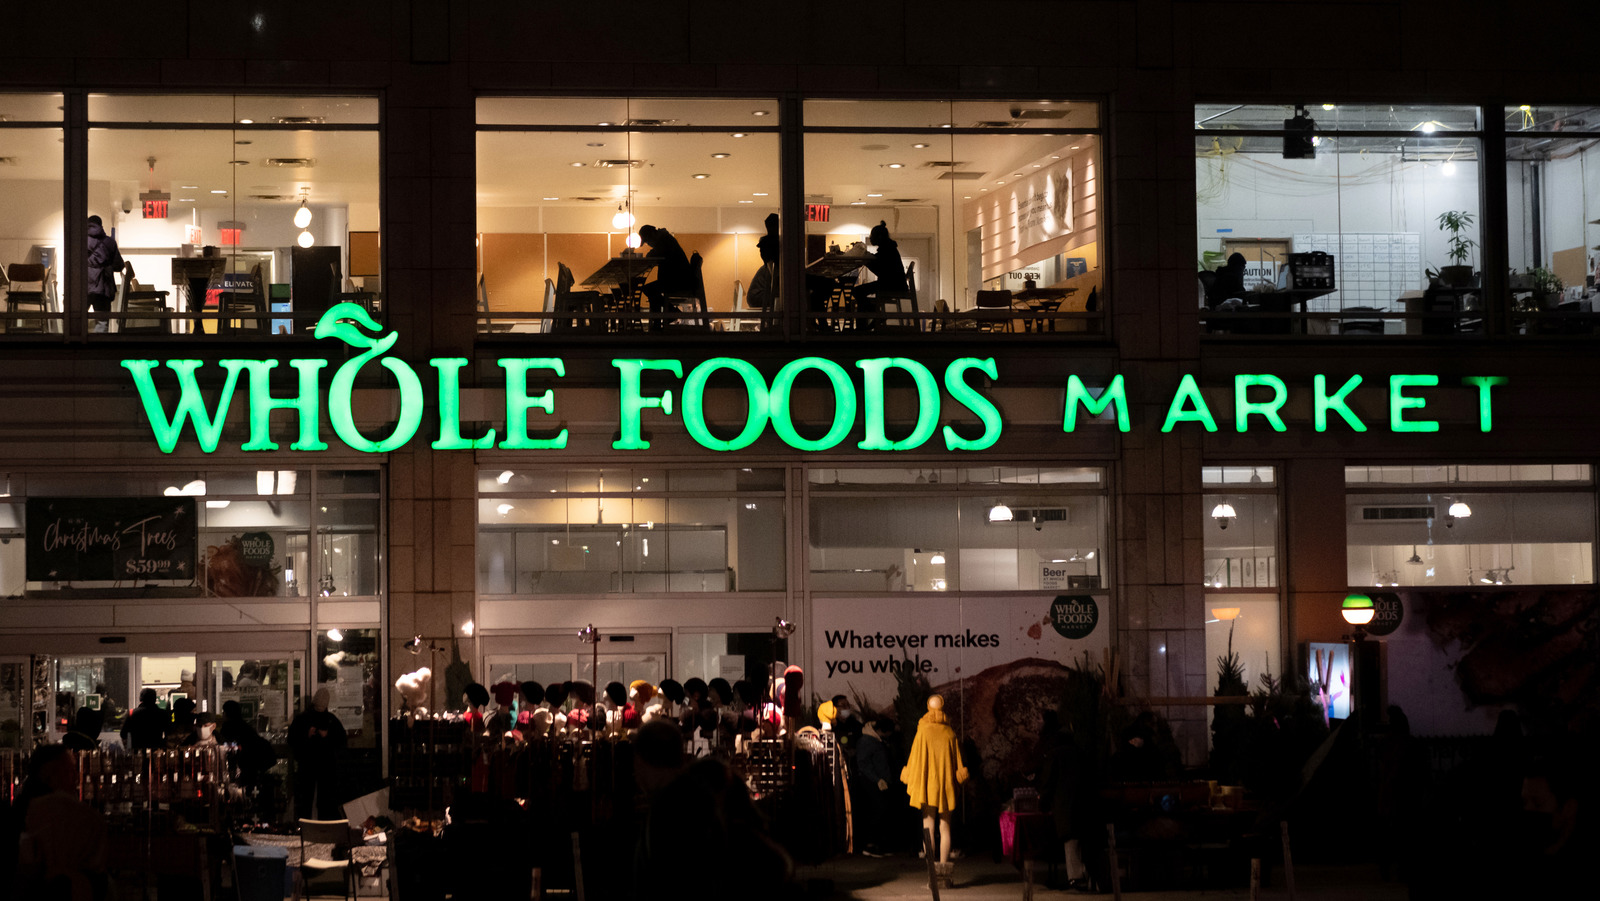 This Scandal Forced Whole Foods To Pay A 500,000 Settlement